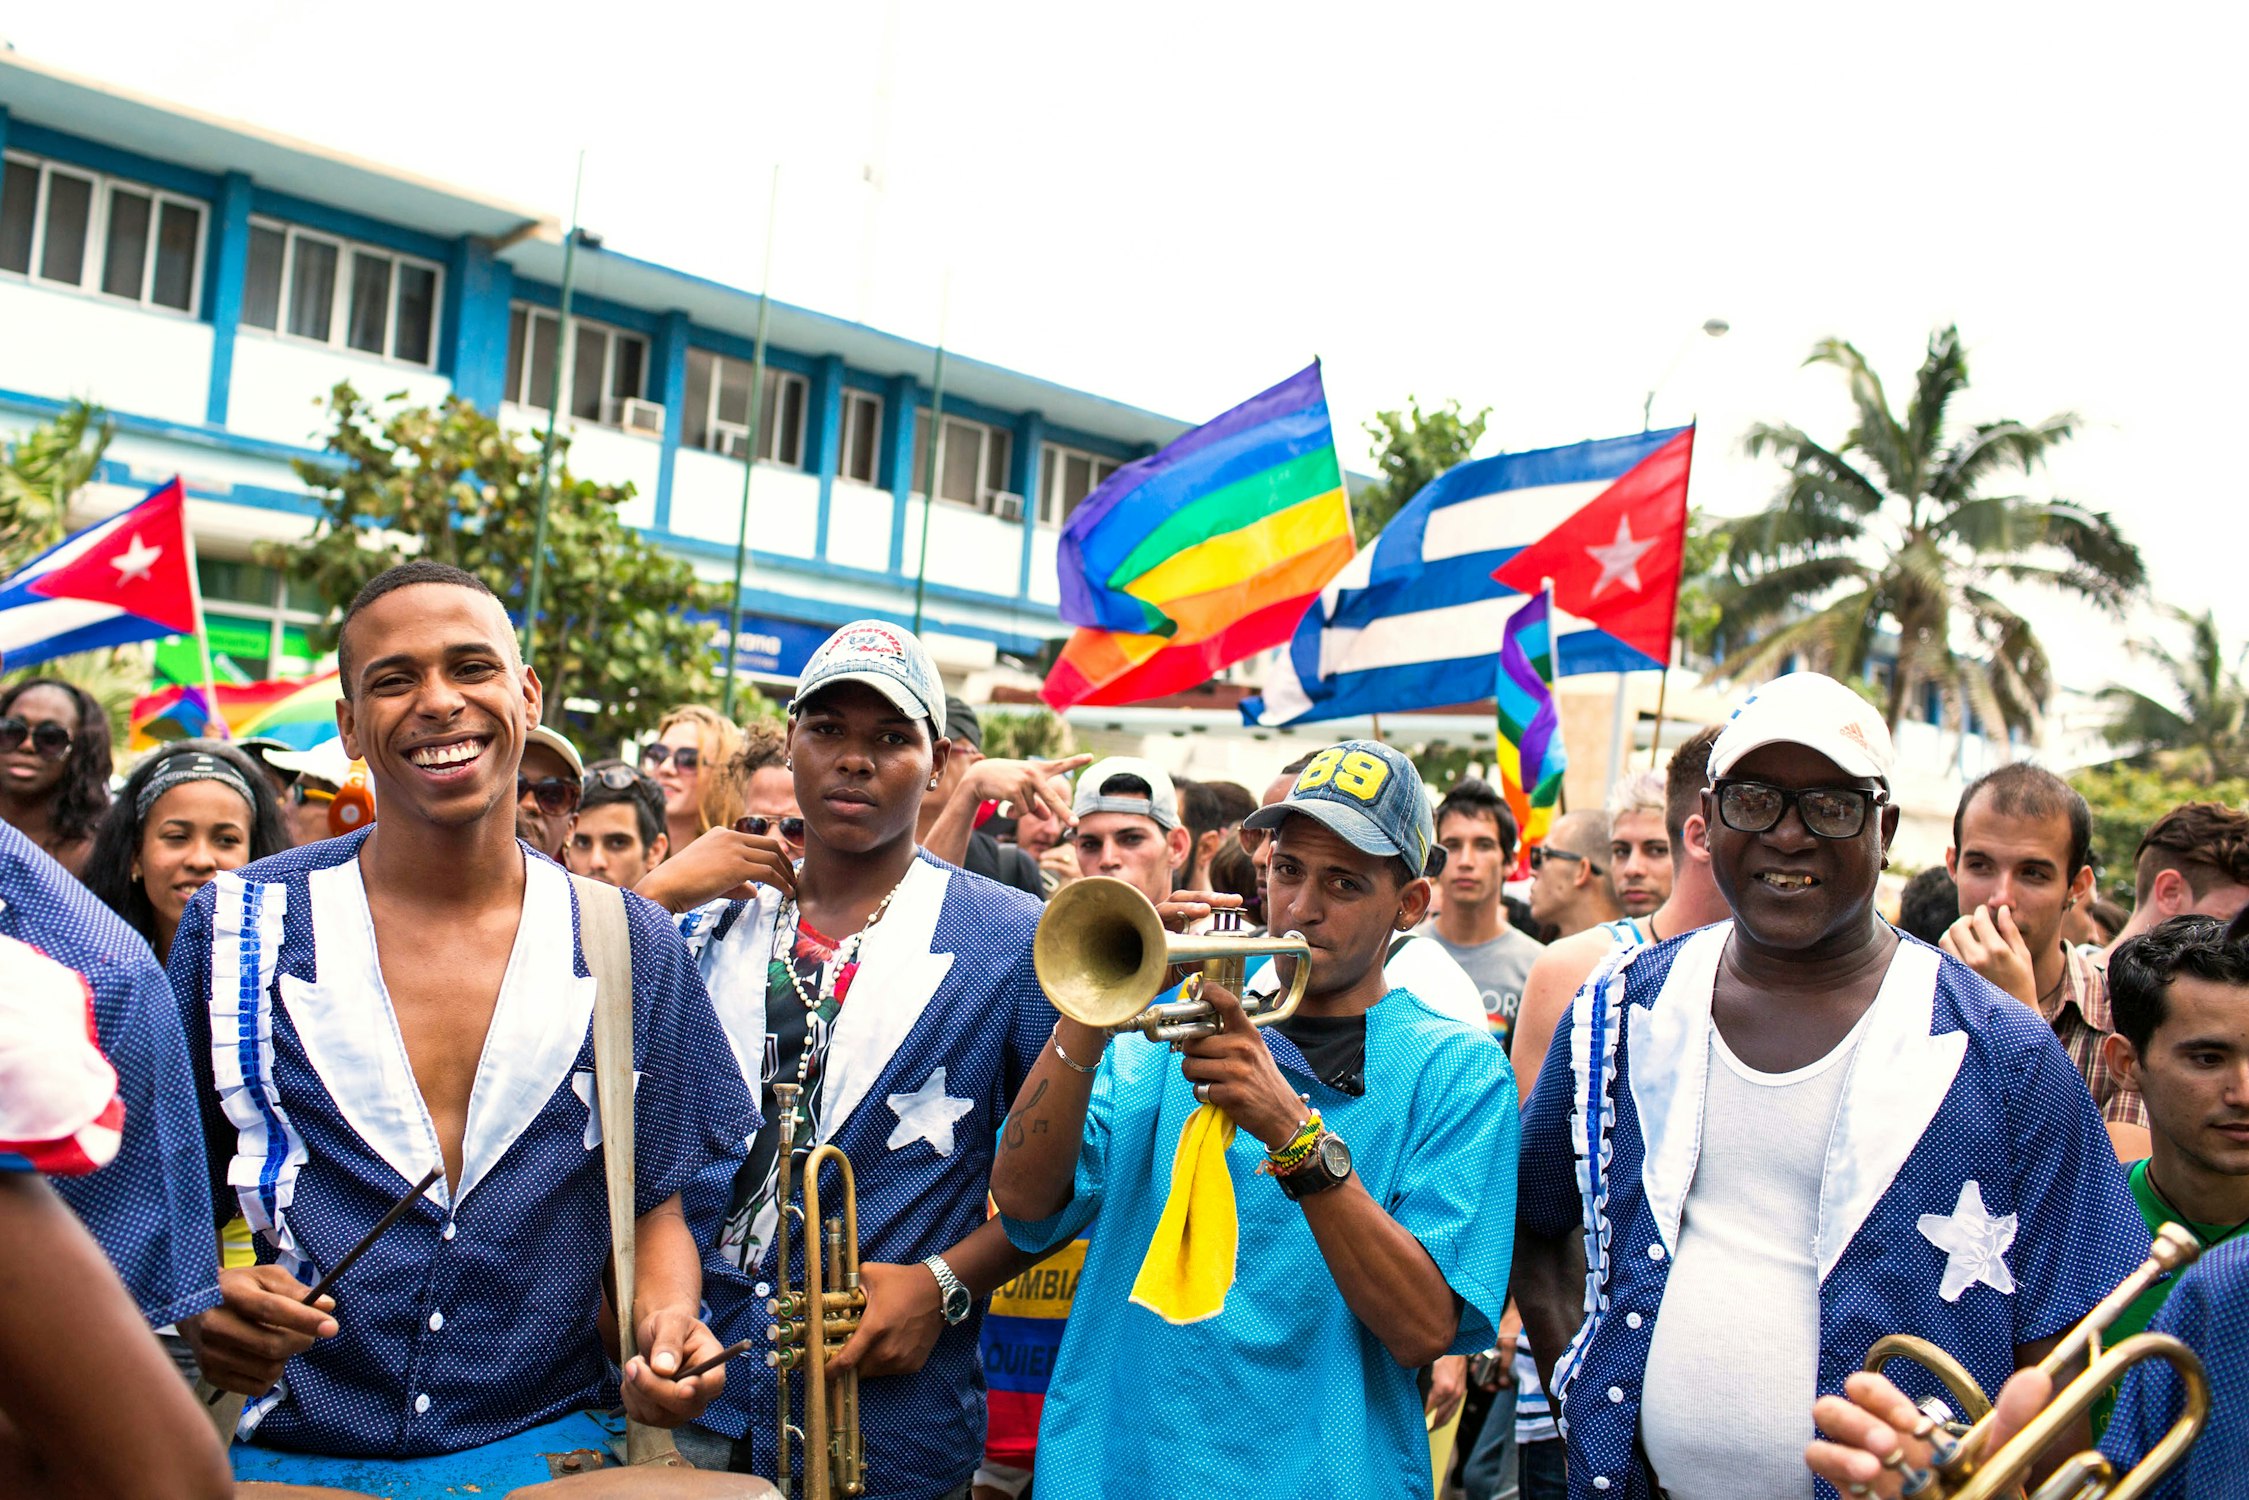 How A Band From La Ended Up Playing Cubas Gay Rights Festival Open